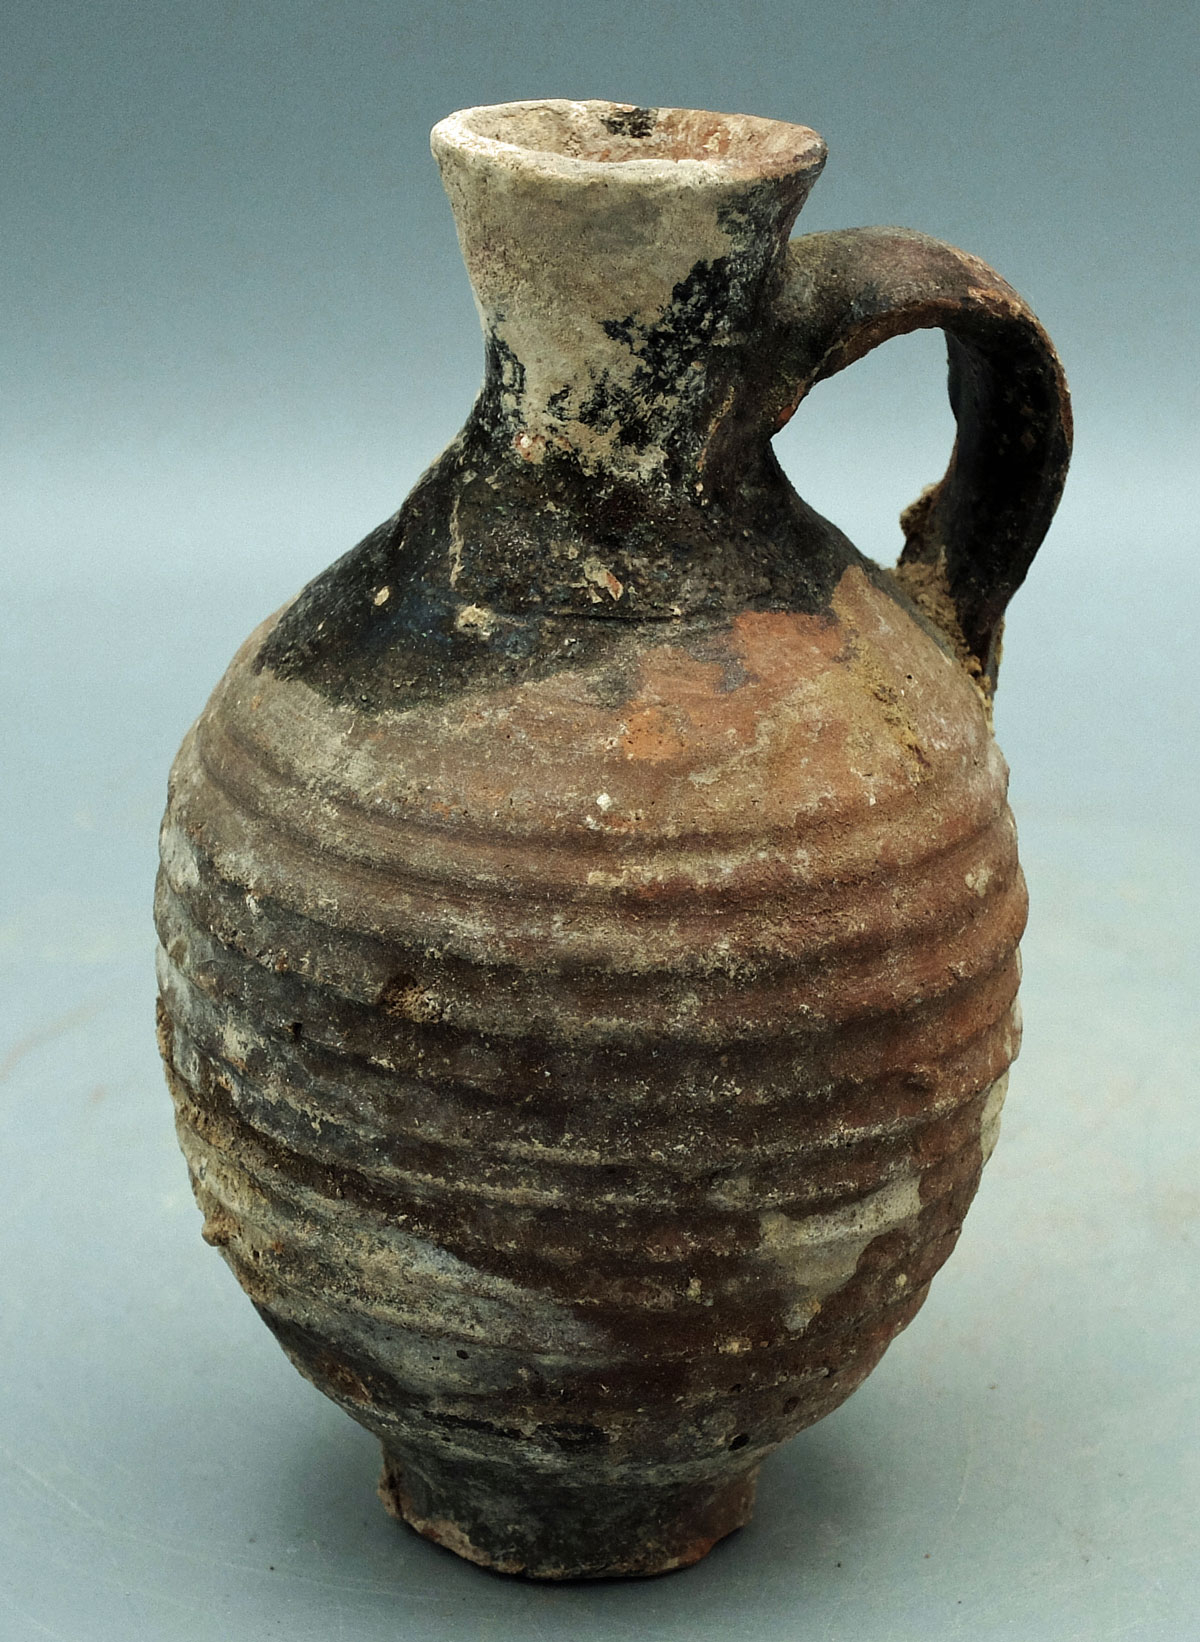 Roman Jug from the Levant, ca. 5th C. AD - Image 3 of 3